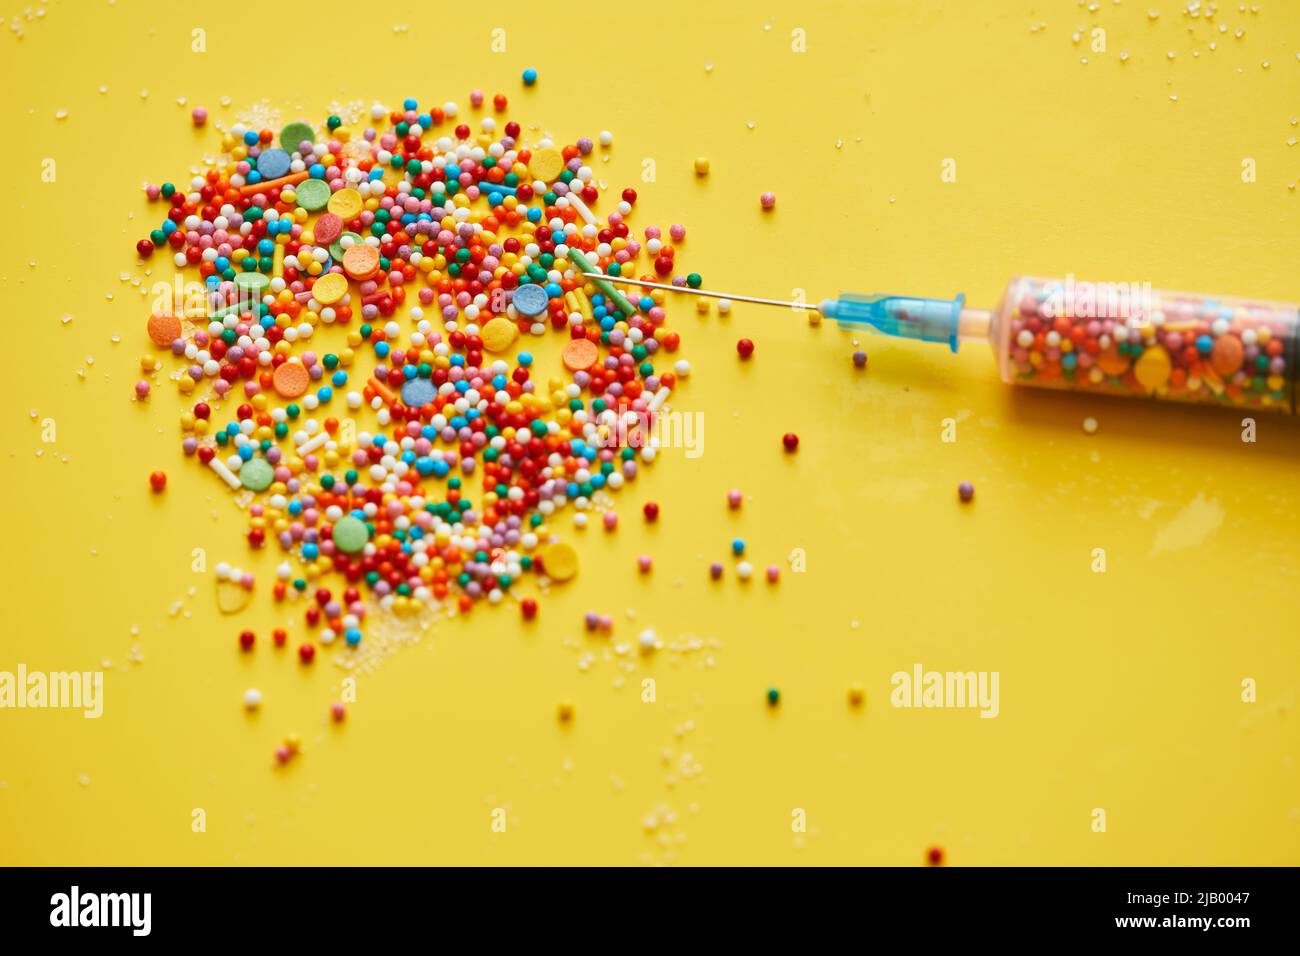 Close-up of splattering sweet sprinkles and needle of medical syringe on bright yellow background Stock Photo